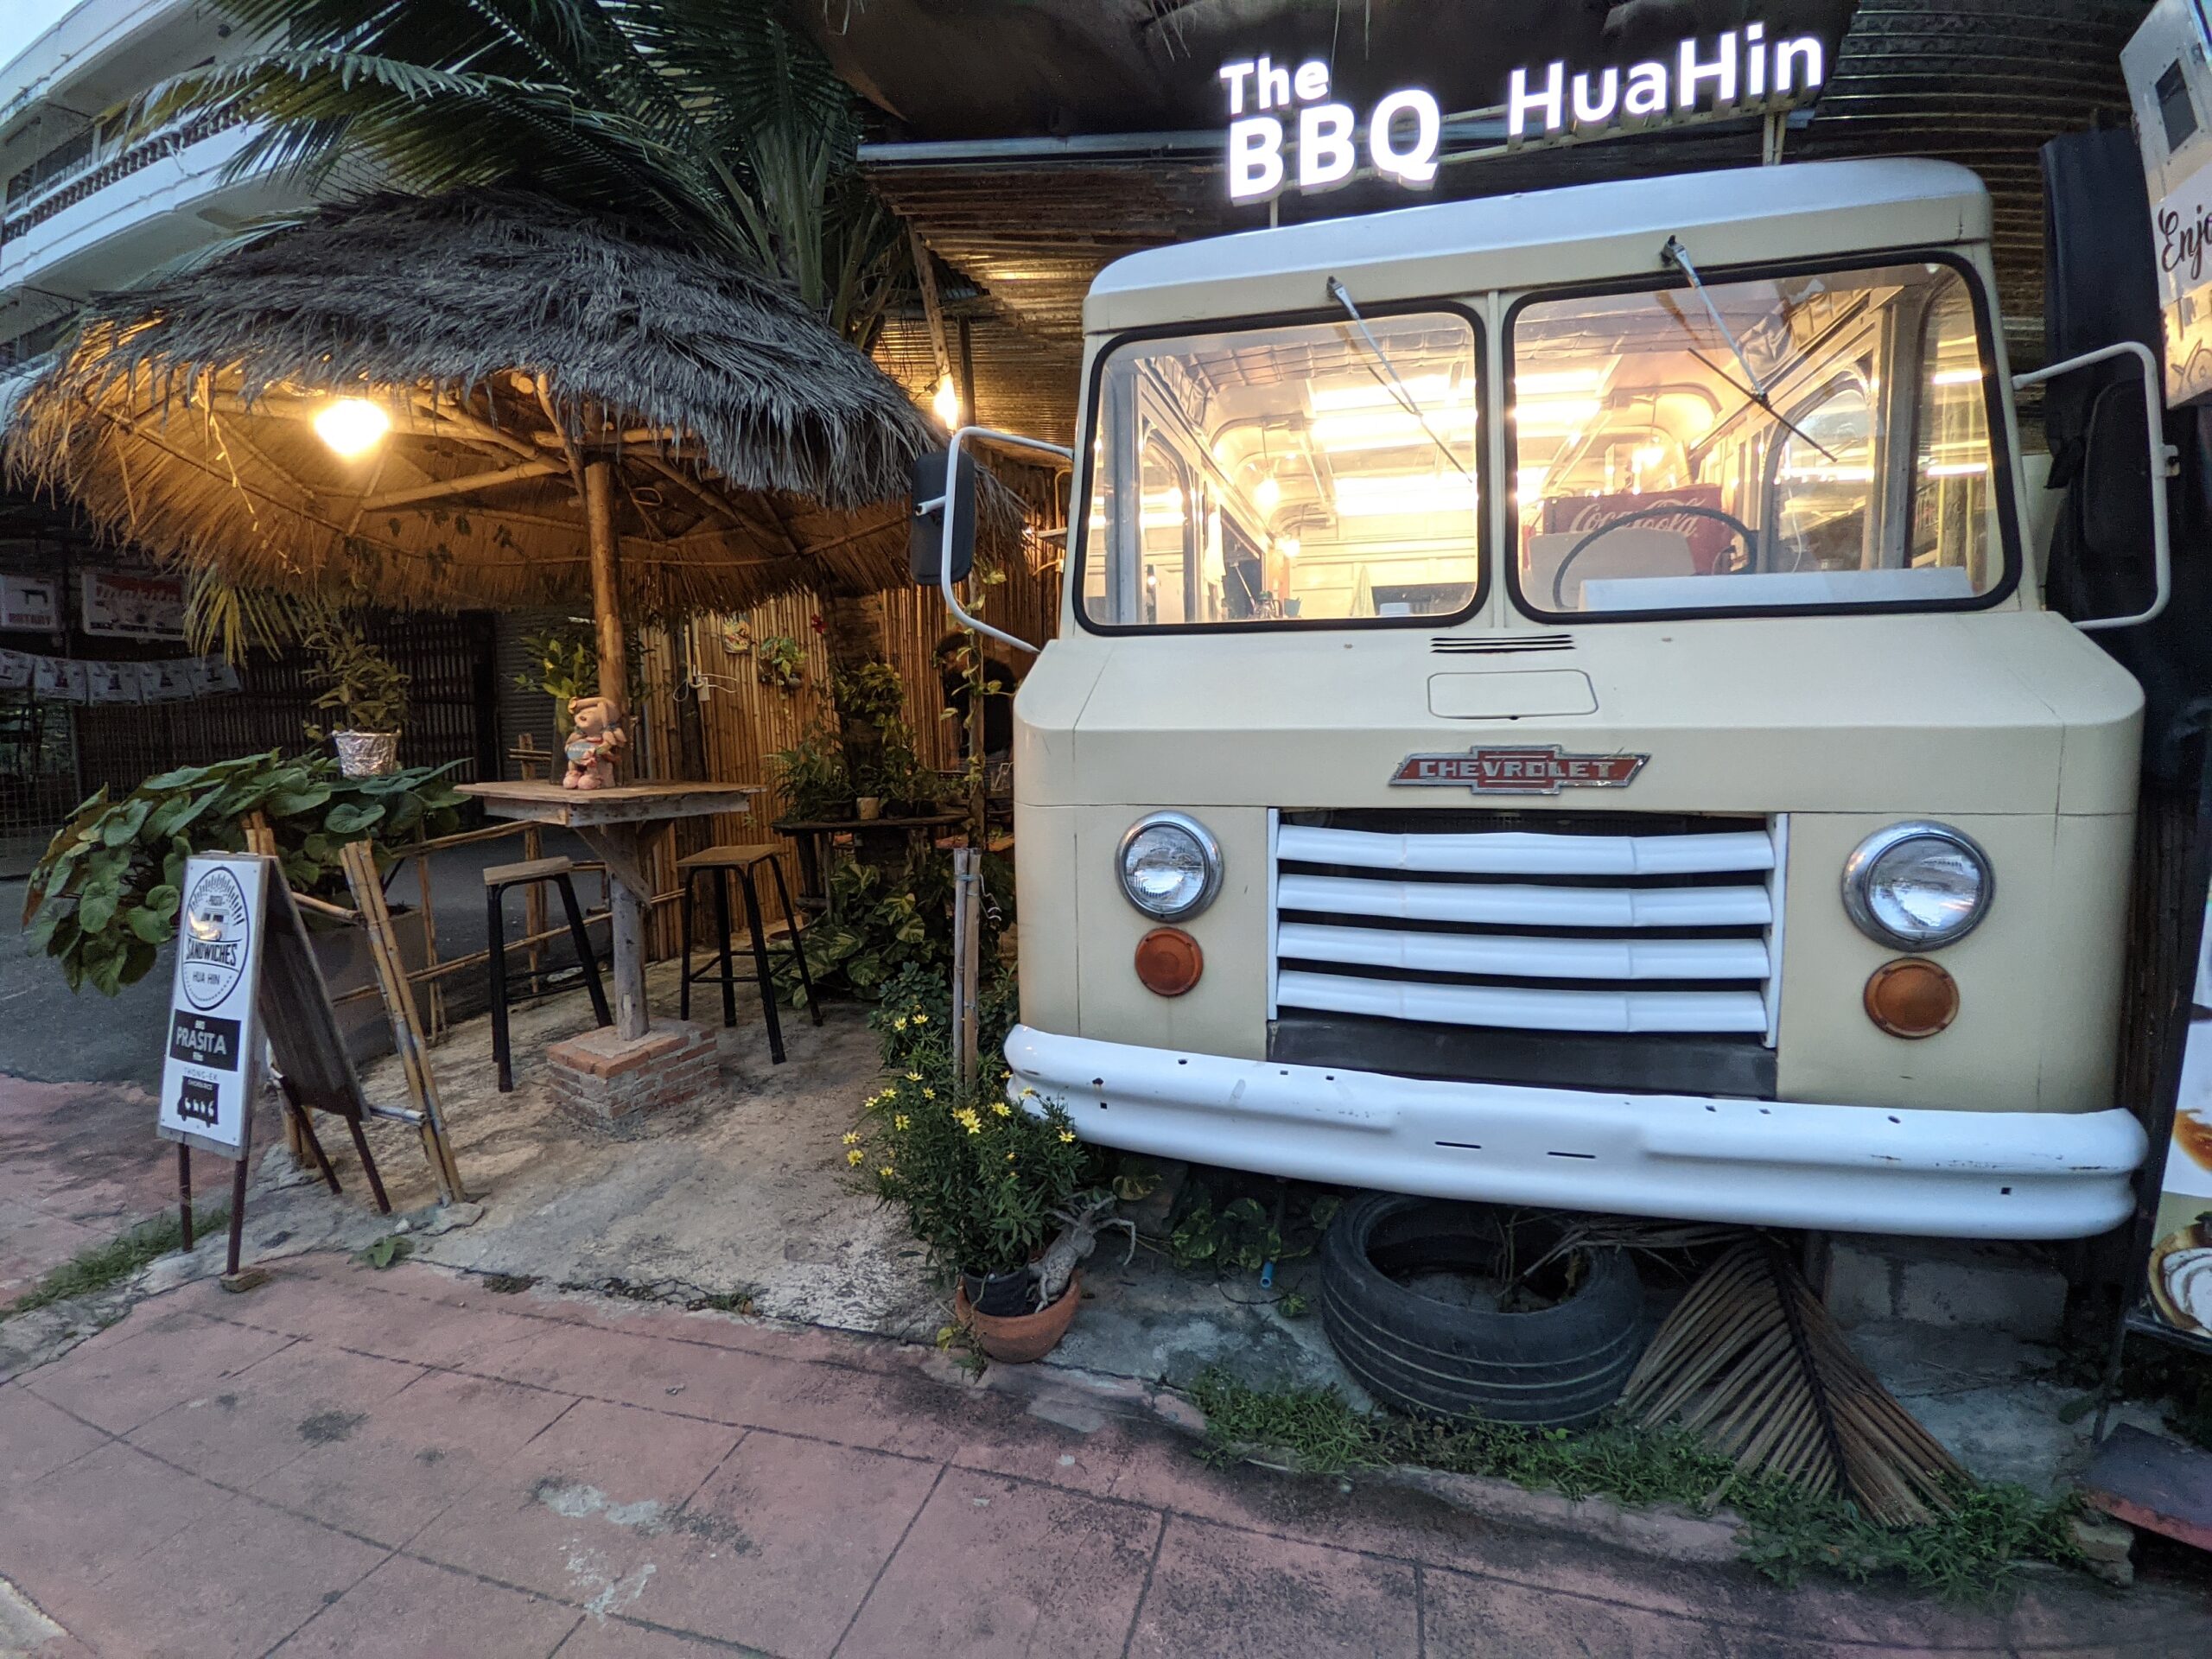 The BBQ Hua Hin – the best chicken in town?